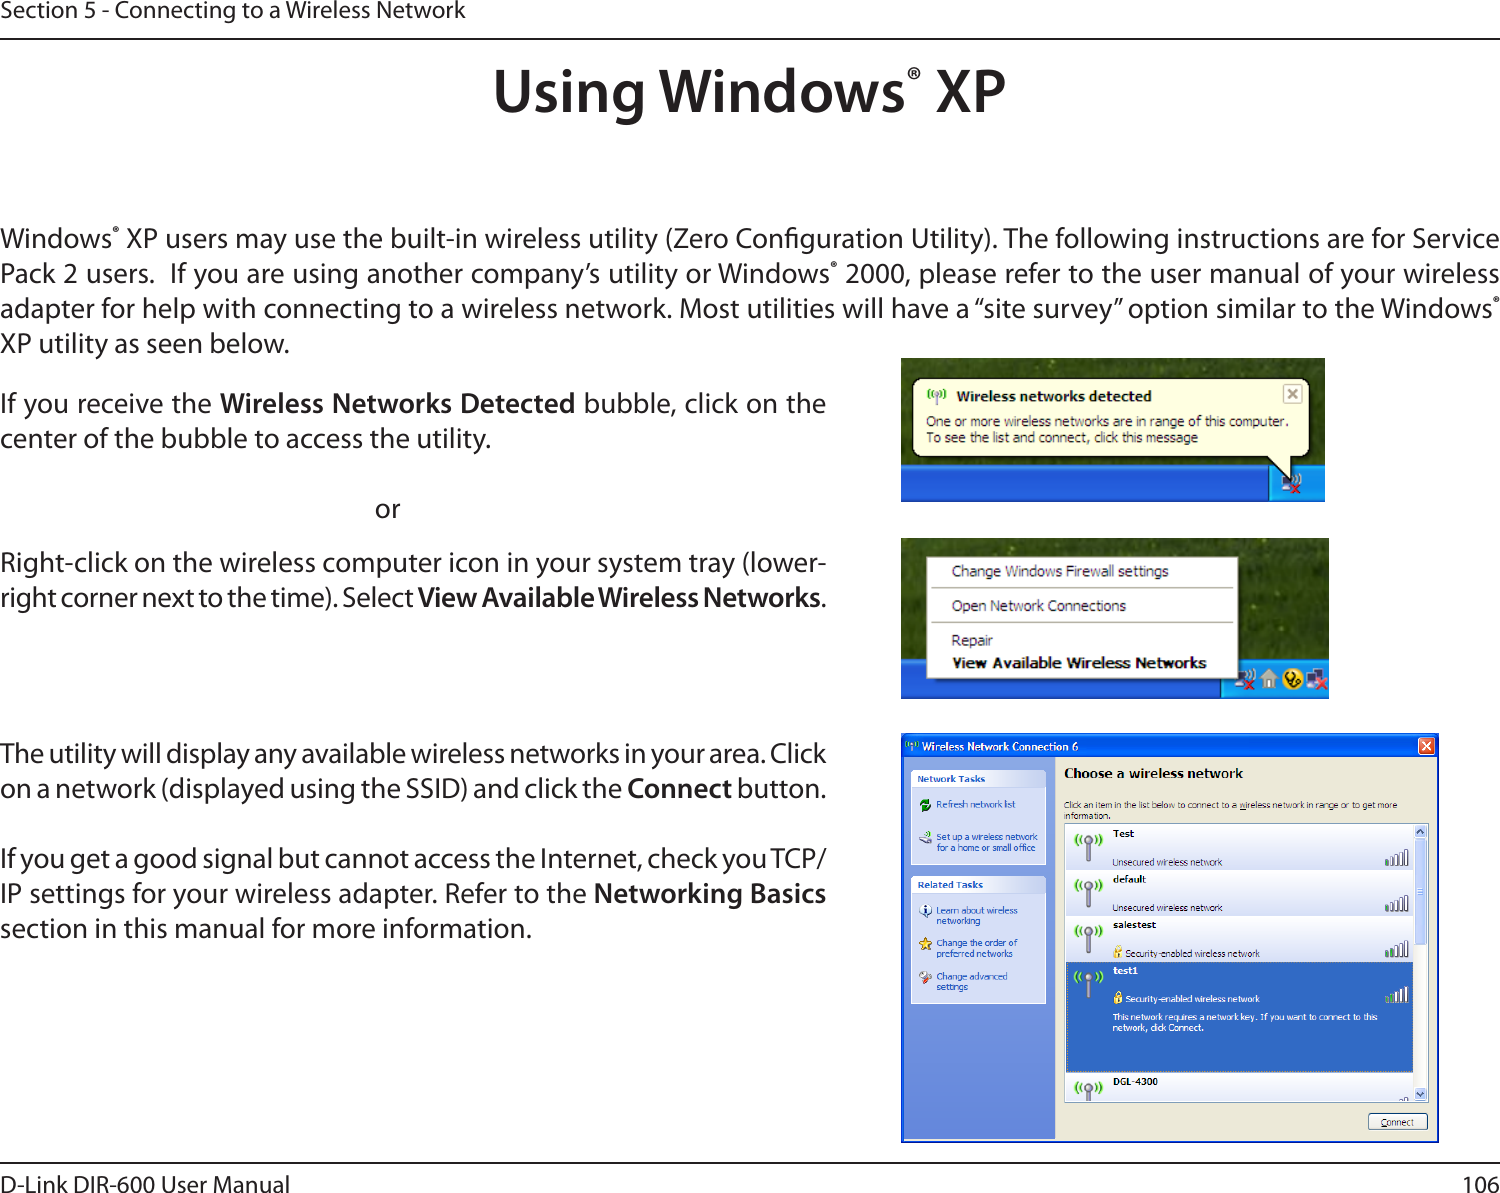 106D-Link DIR-600 User ManualSection 5 - Connecting to a Wireless NetworkUsing Windows® XPWindows® XP users may use the built-in wireless utility (Zero Conguration Utility). The following instructions are for Service Pack 2 users.  If you are using another company’s utility or Windows® 2000, please refer to the user manual of your wireless adapter for help with connecting to a wireless network. Most utilities will have a “site survey” option similar to the Windows® XP utility as seen below.Right-click on the wireless computer icon in your system tray (lower-right corner next to the time). Select View Available Wireless Networks.If you receive the Wireless Networks Detected bubble, click on the center of the bubble to access the utility.     orThe utility will display any available wireless networks in your area. Click on a network (displayed using the SSID) and click the Connect button.If you get a good signal but cannot access the Internet, check you TCP/IP settings for your wireless adapter. Refer to the Networking Basics section in this manual for more information.